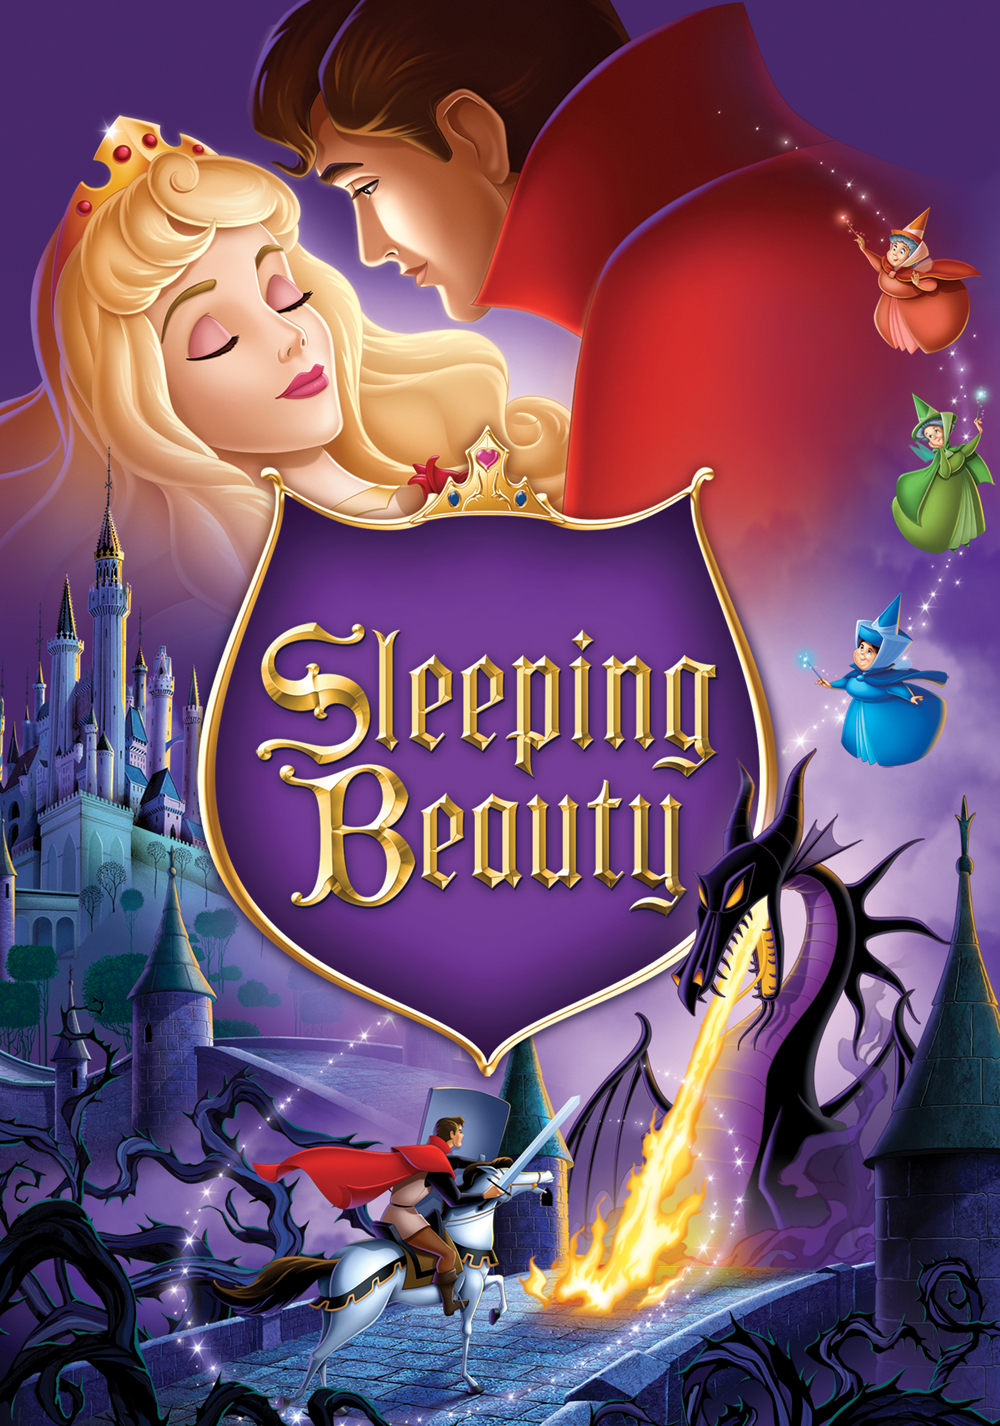 Sleeping Beauty 1959 Movie Poster Id 124405 Image Abyss